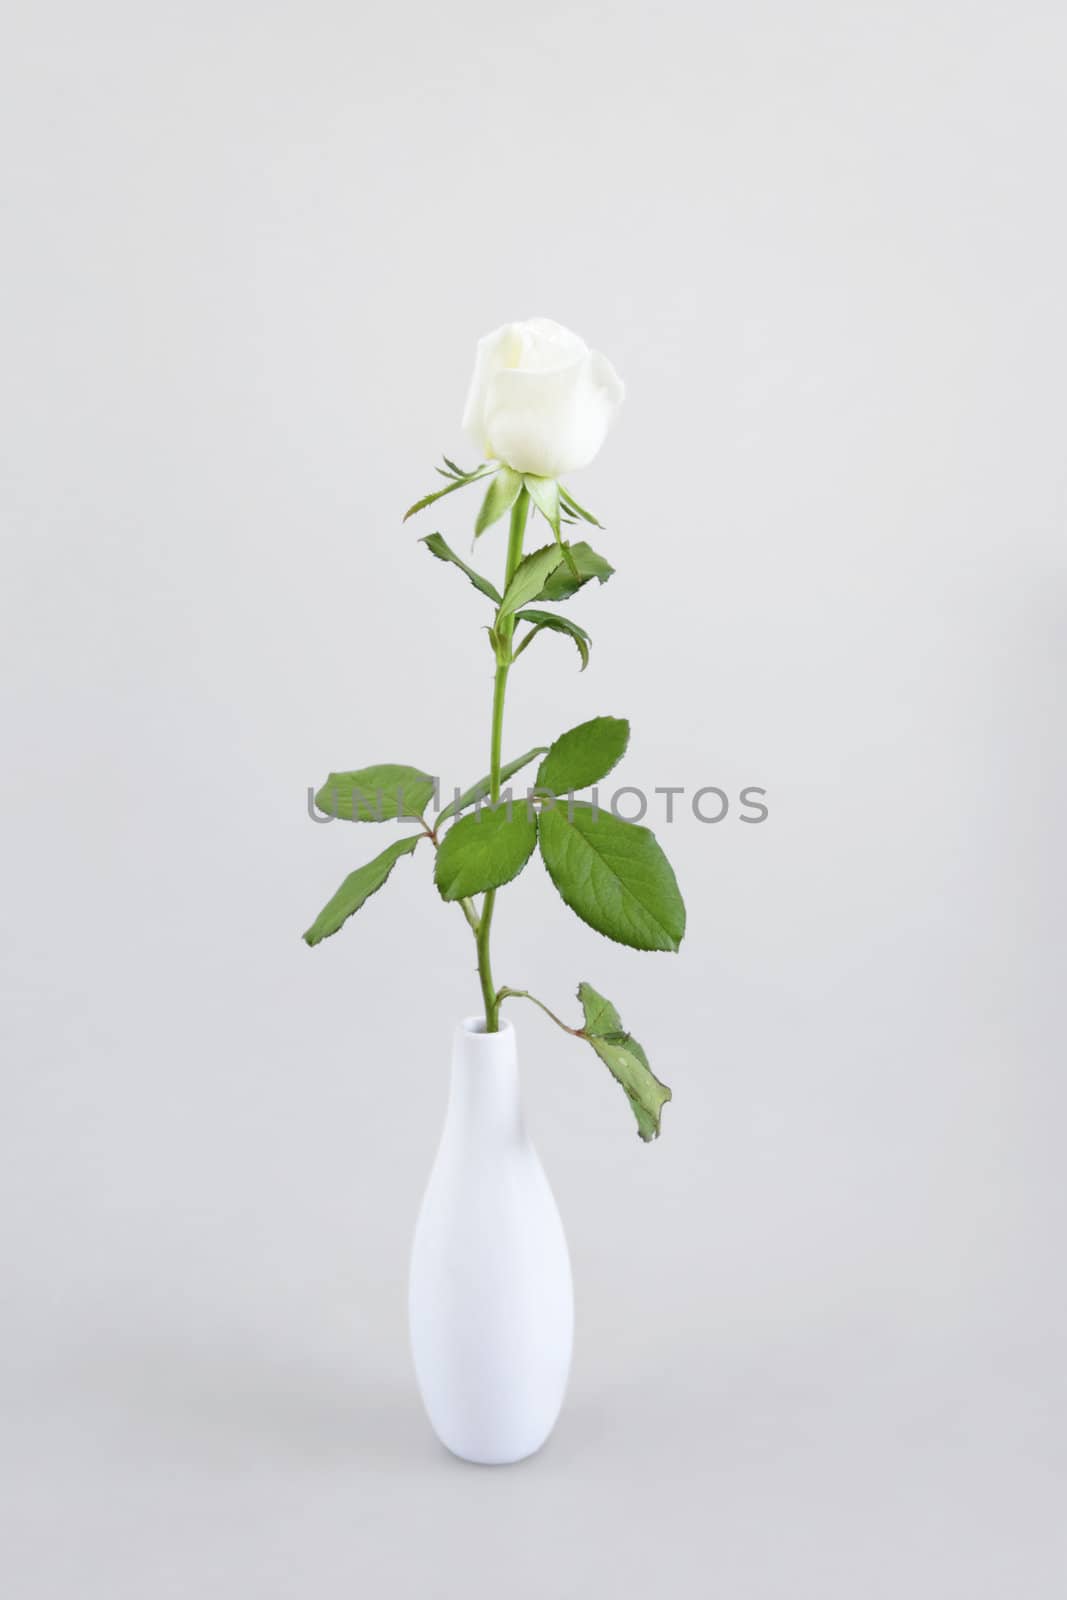 gentle cream rose on a light background by Serp